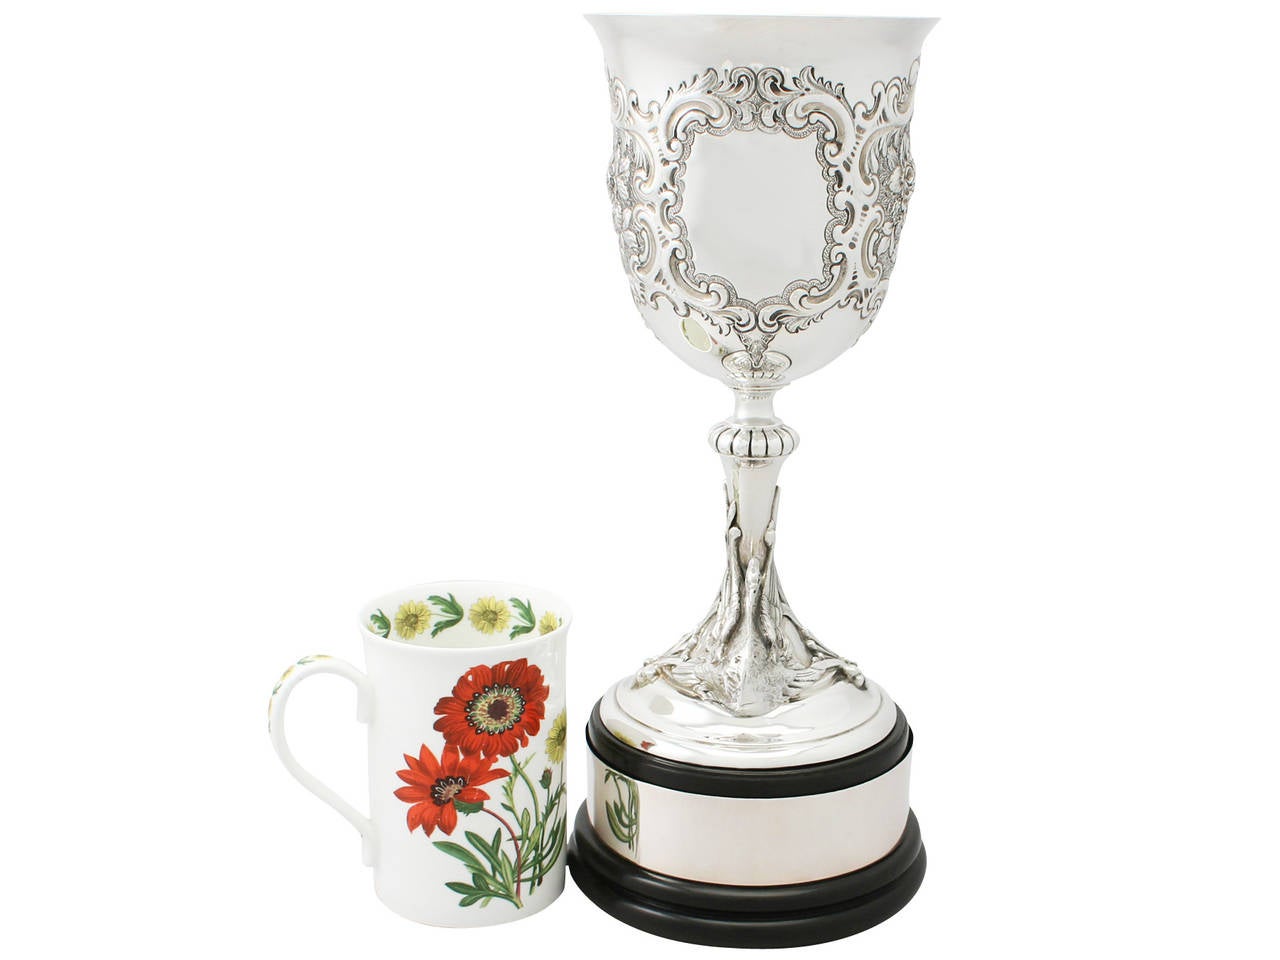 An exceptional, fine and impressive, unusual antique Victorian English sterling silver presentation trophy; part of our presentation silverware collection

This exceptional antique Victorian sterling silver presentation trophy has a plain circular